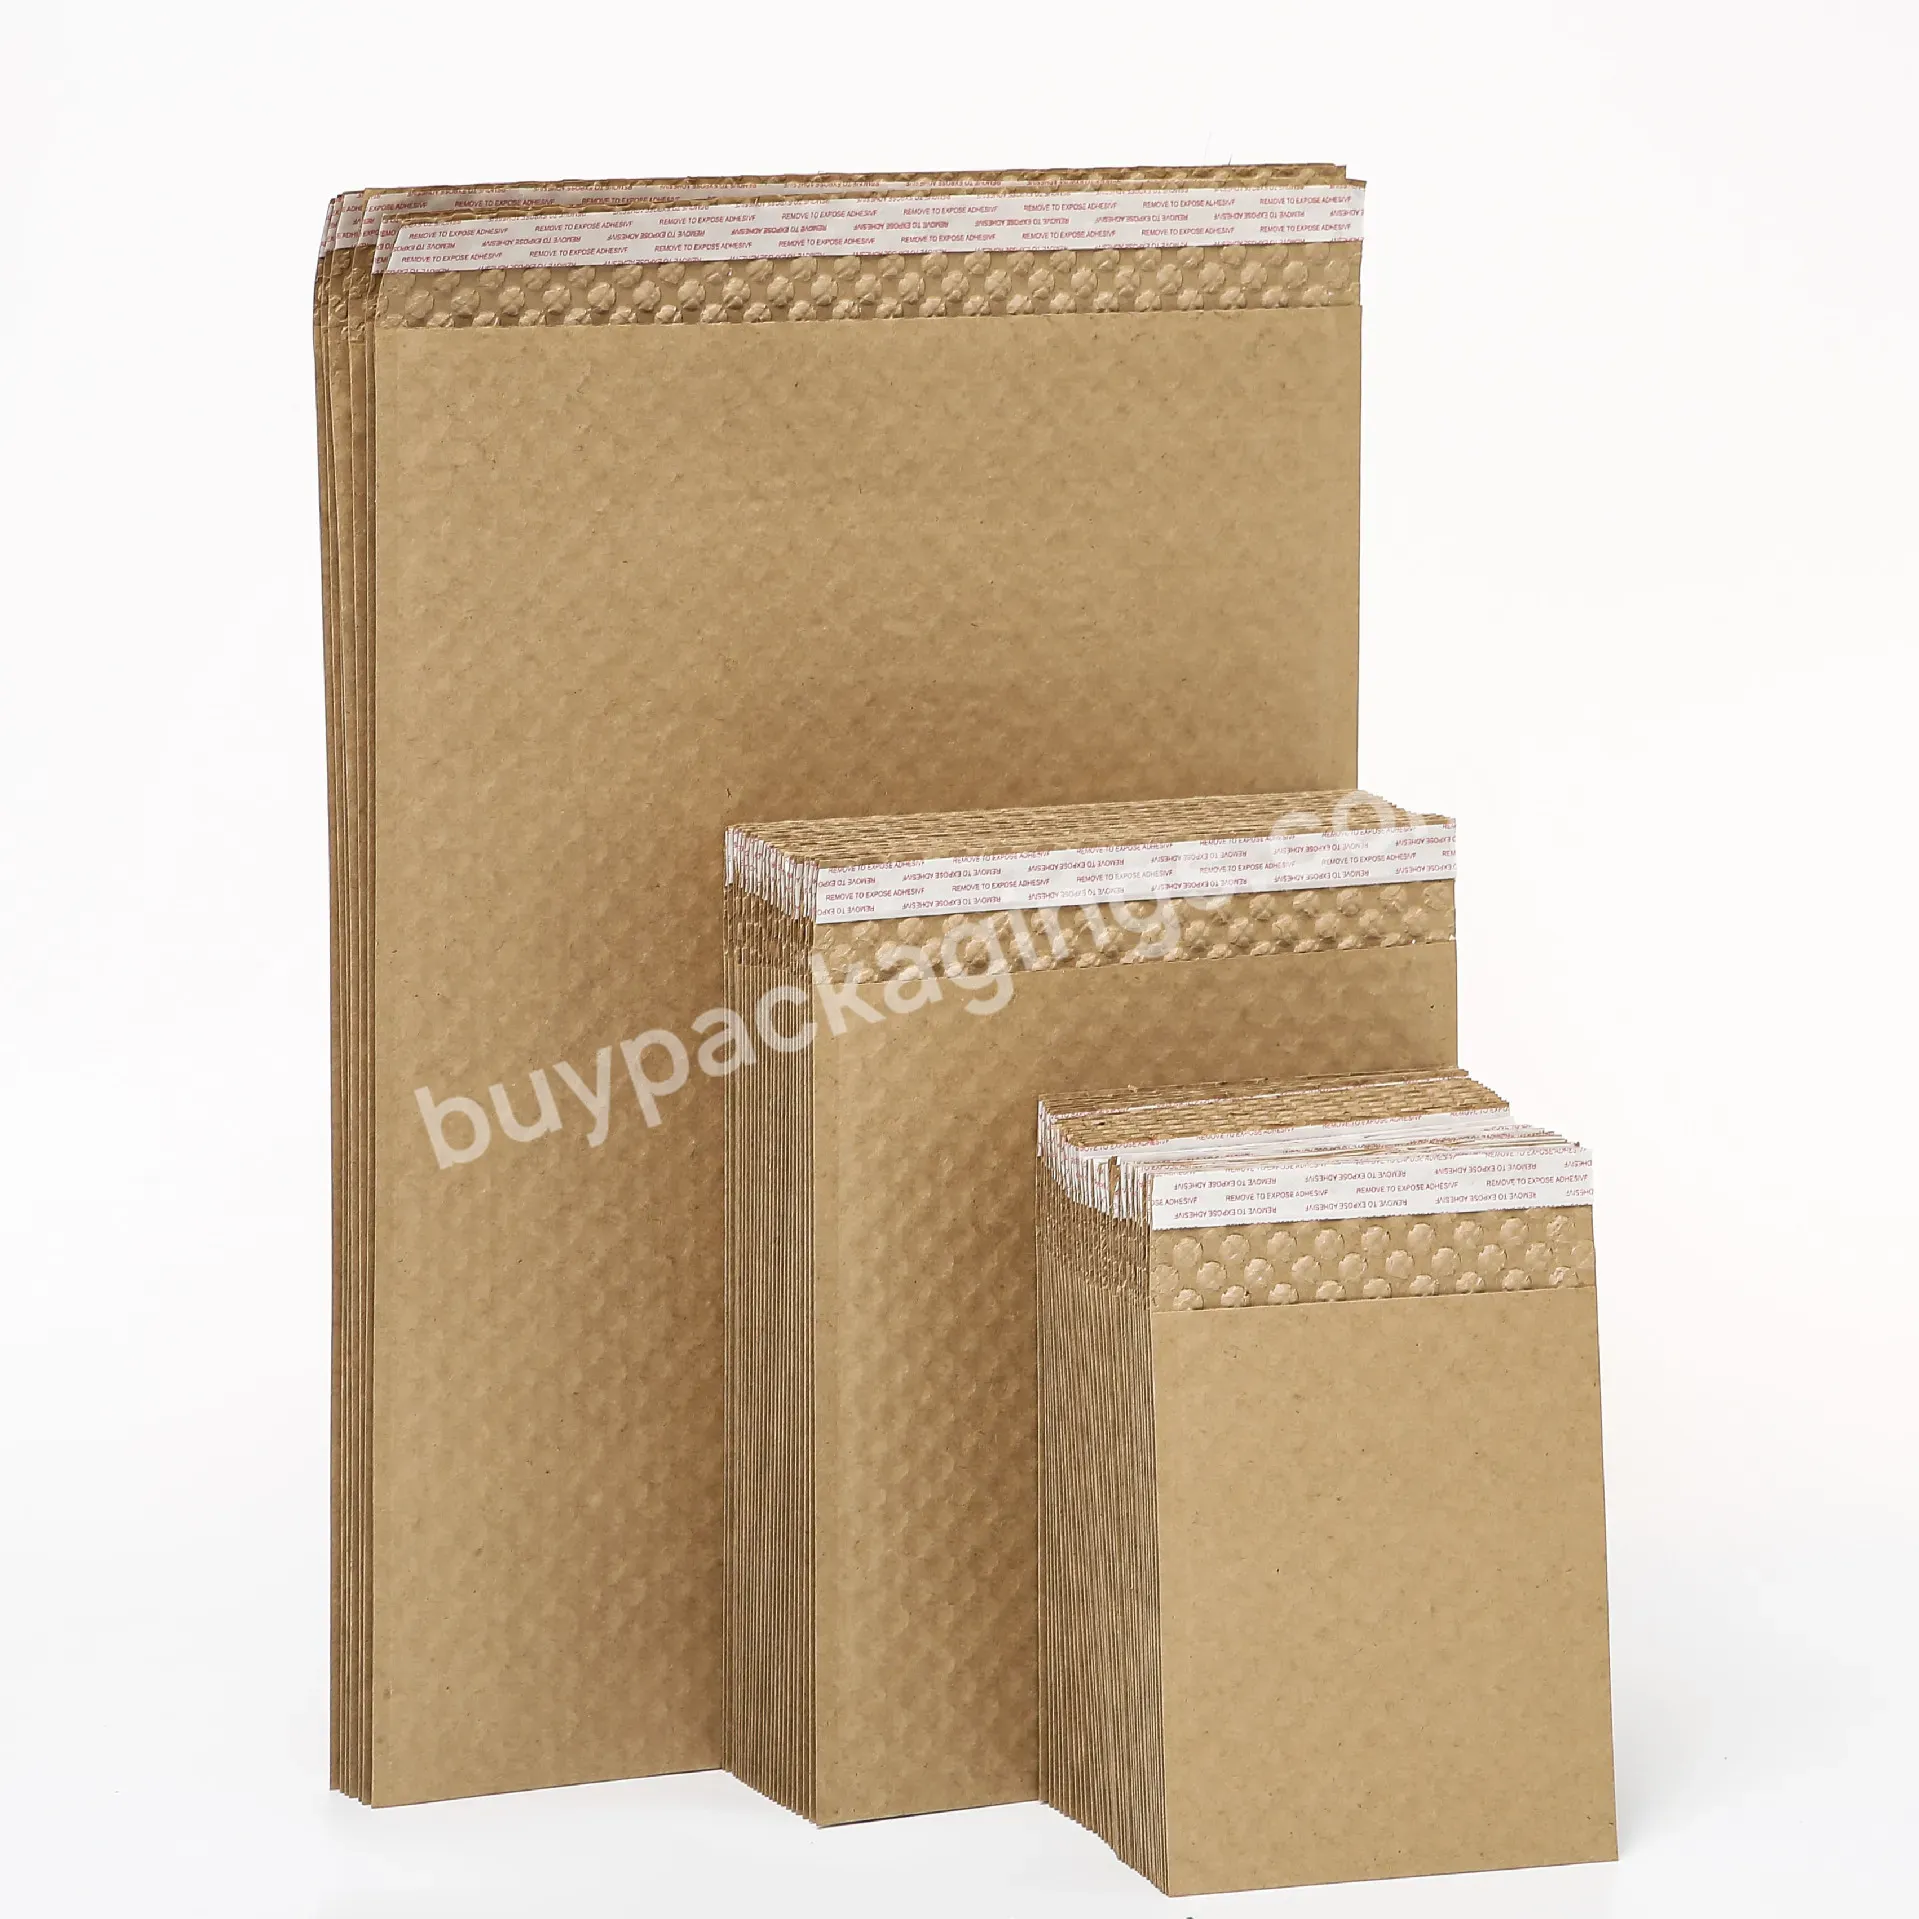 32*35*kraft Paper Mailing Courier Bags Mail Bag Compostable Bubble Mailers 9x12 - Buy Bubble Mailers 9x12,Kraft Paper Mailing Courier Bags,32*35*10cm Kraft Paper Mailing Bag.